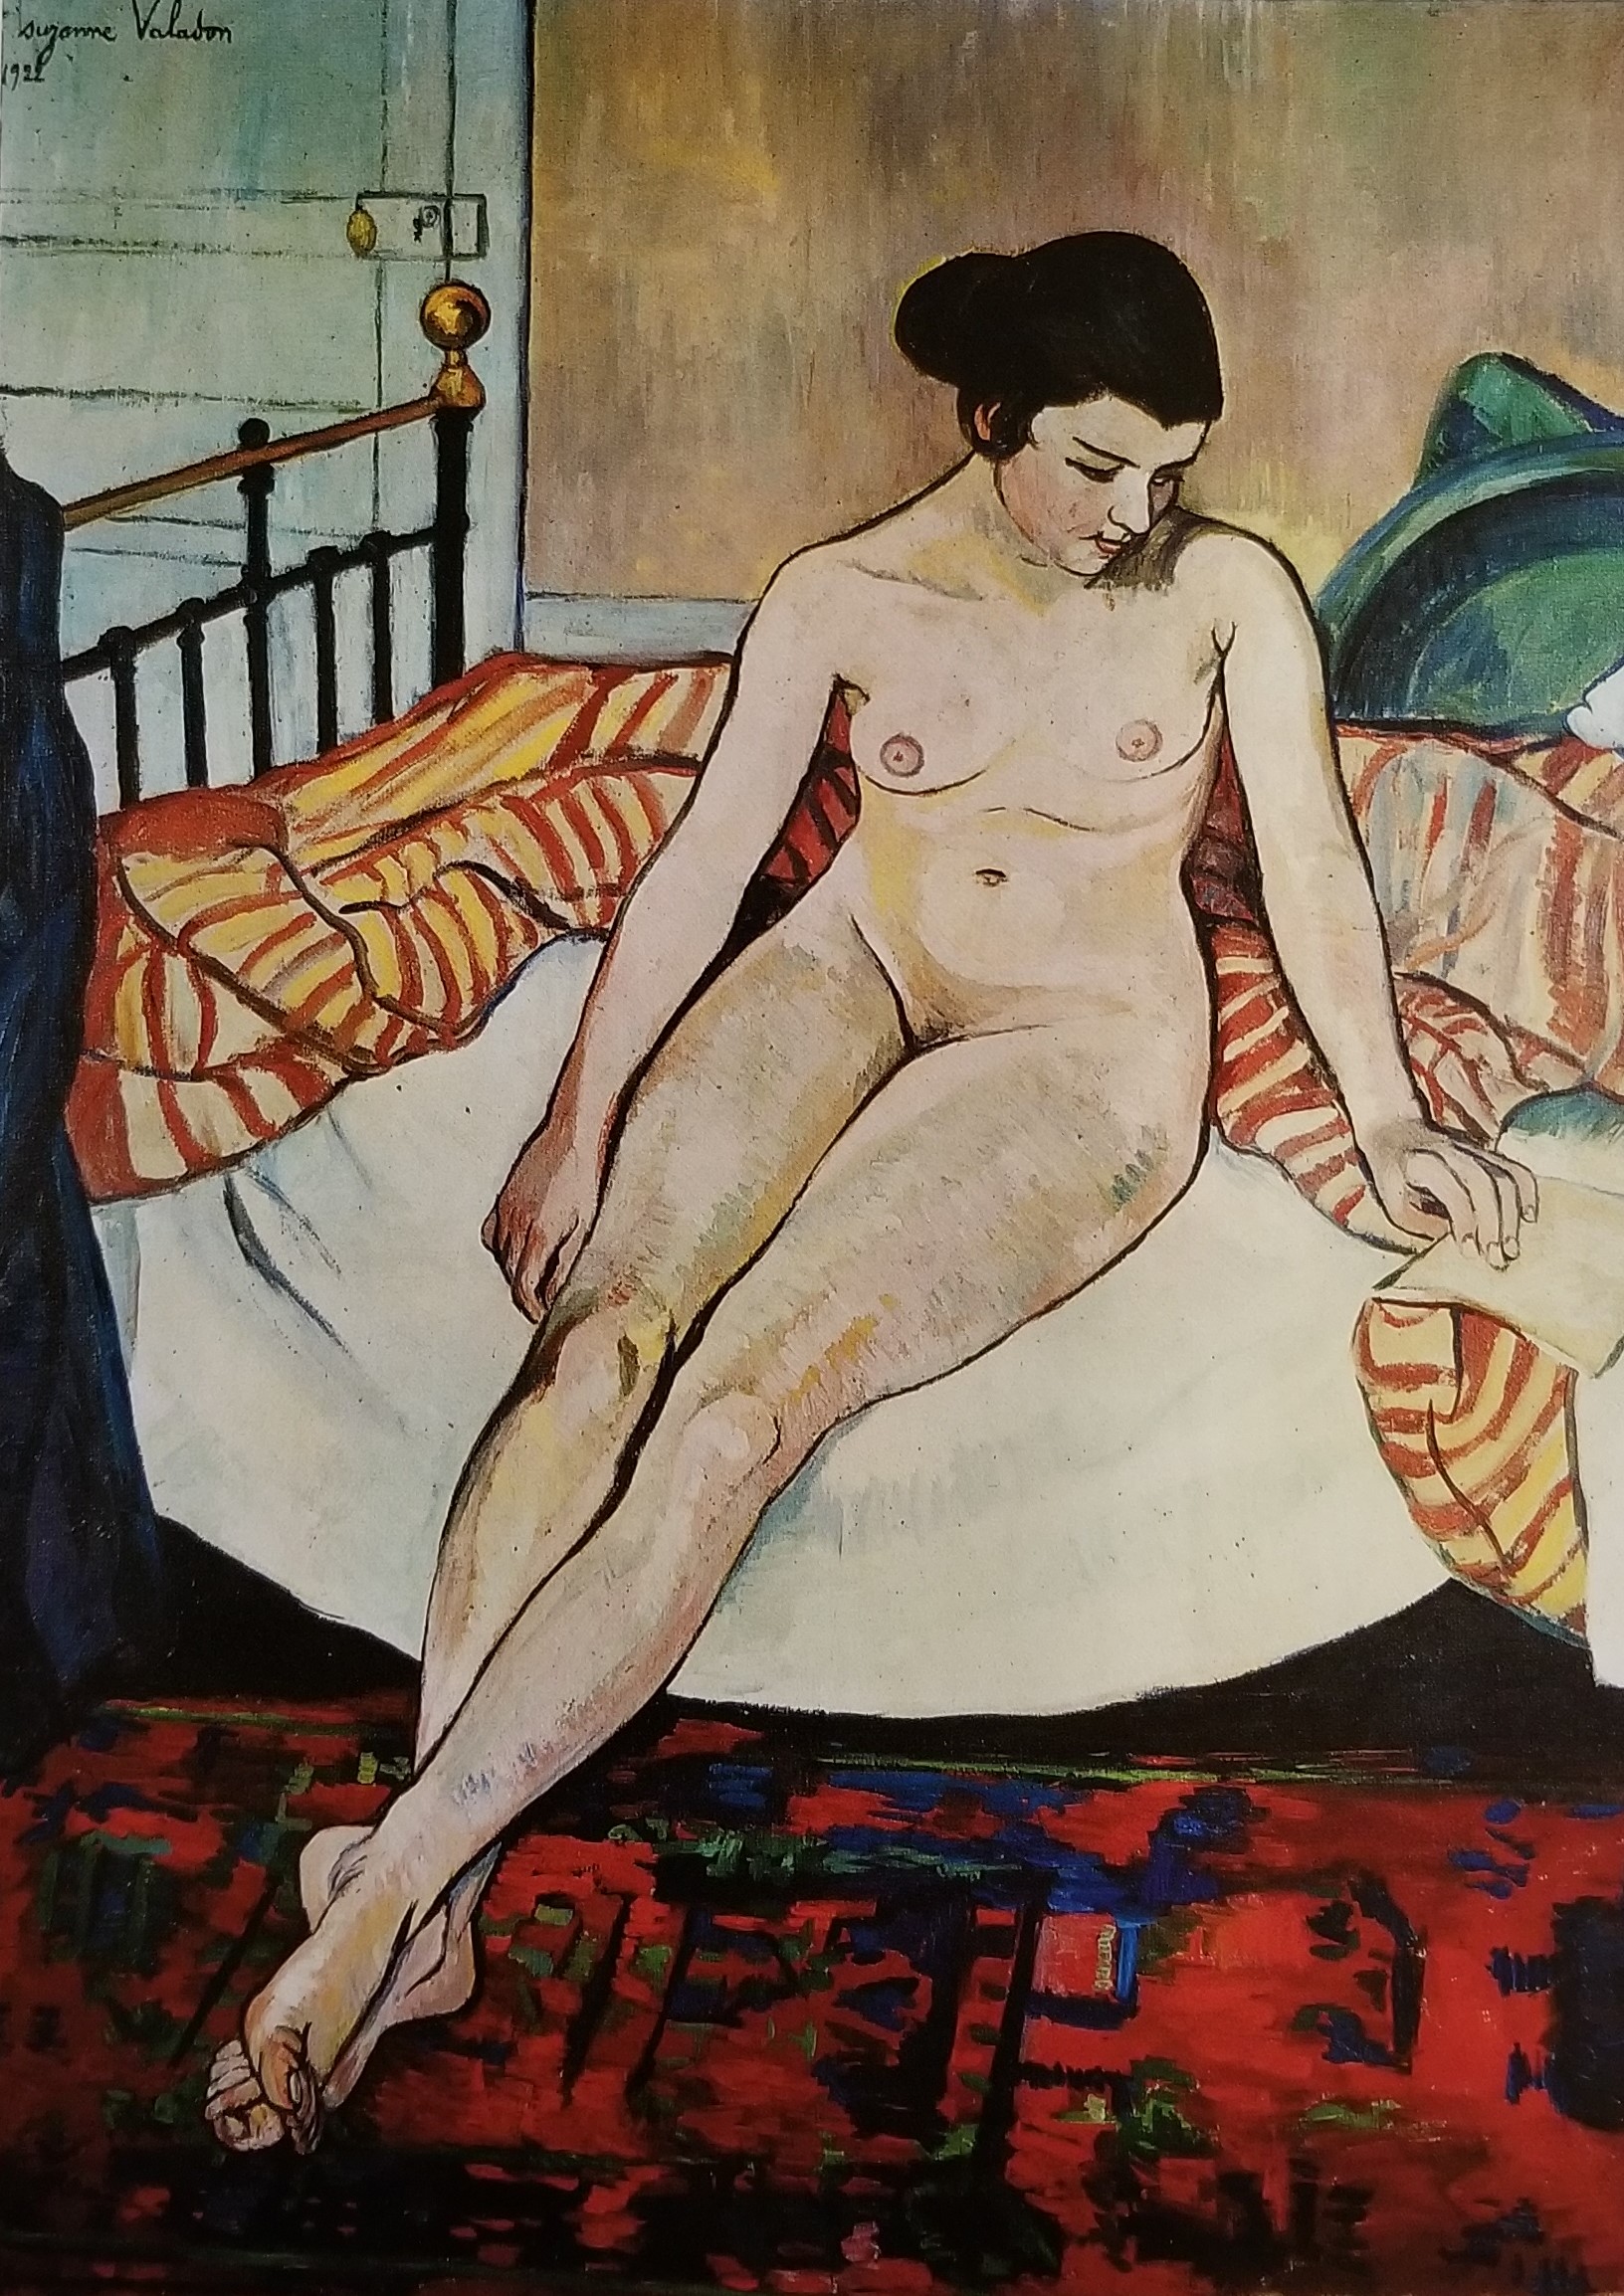 Female Nude by Suzanne Valadon